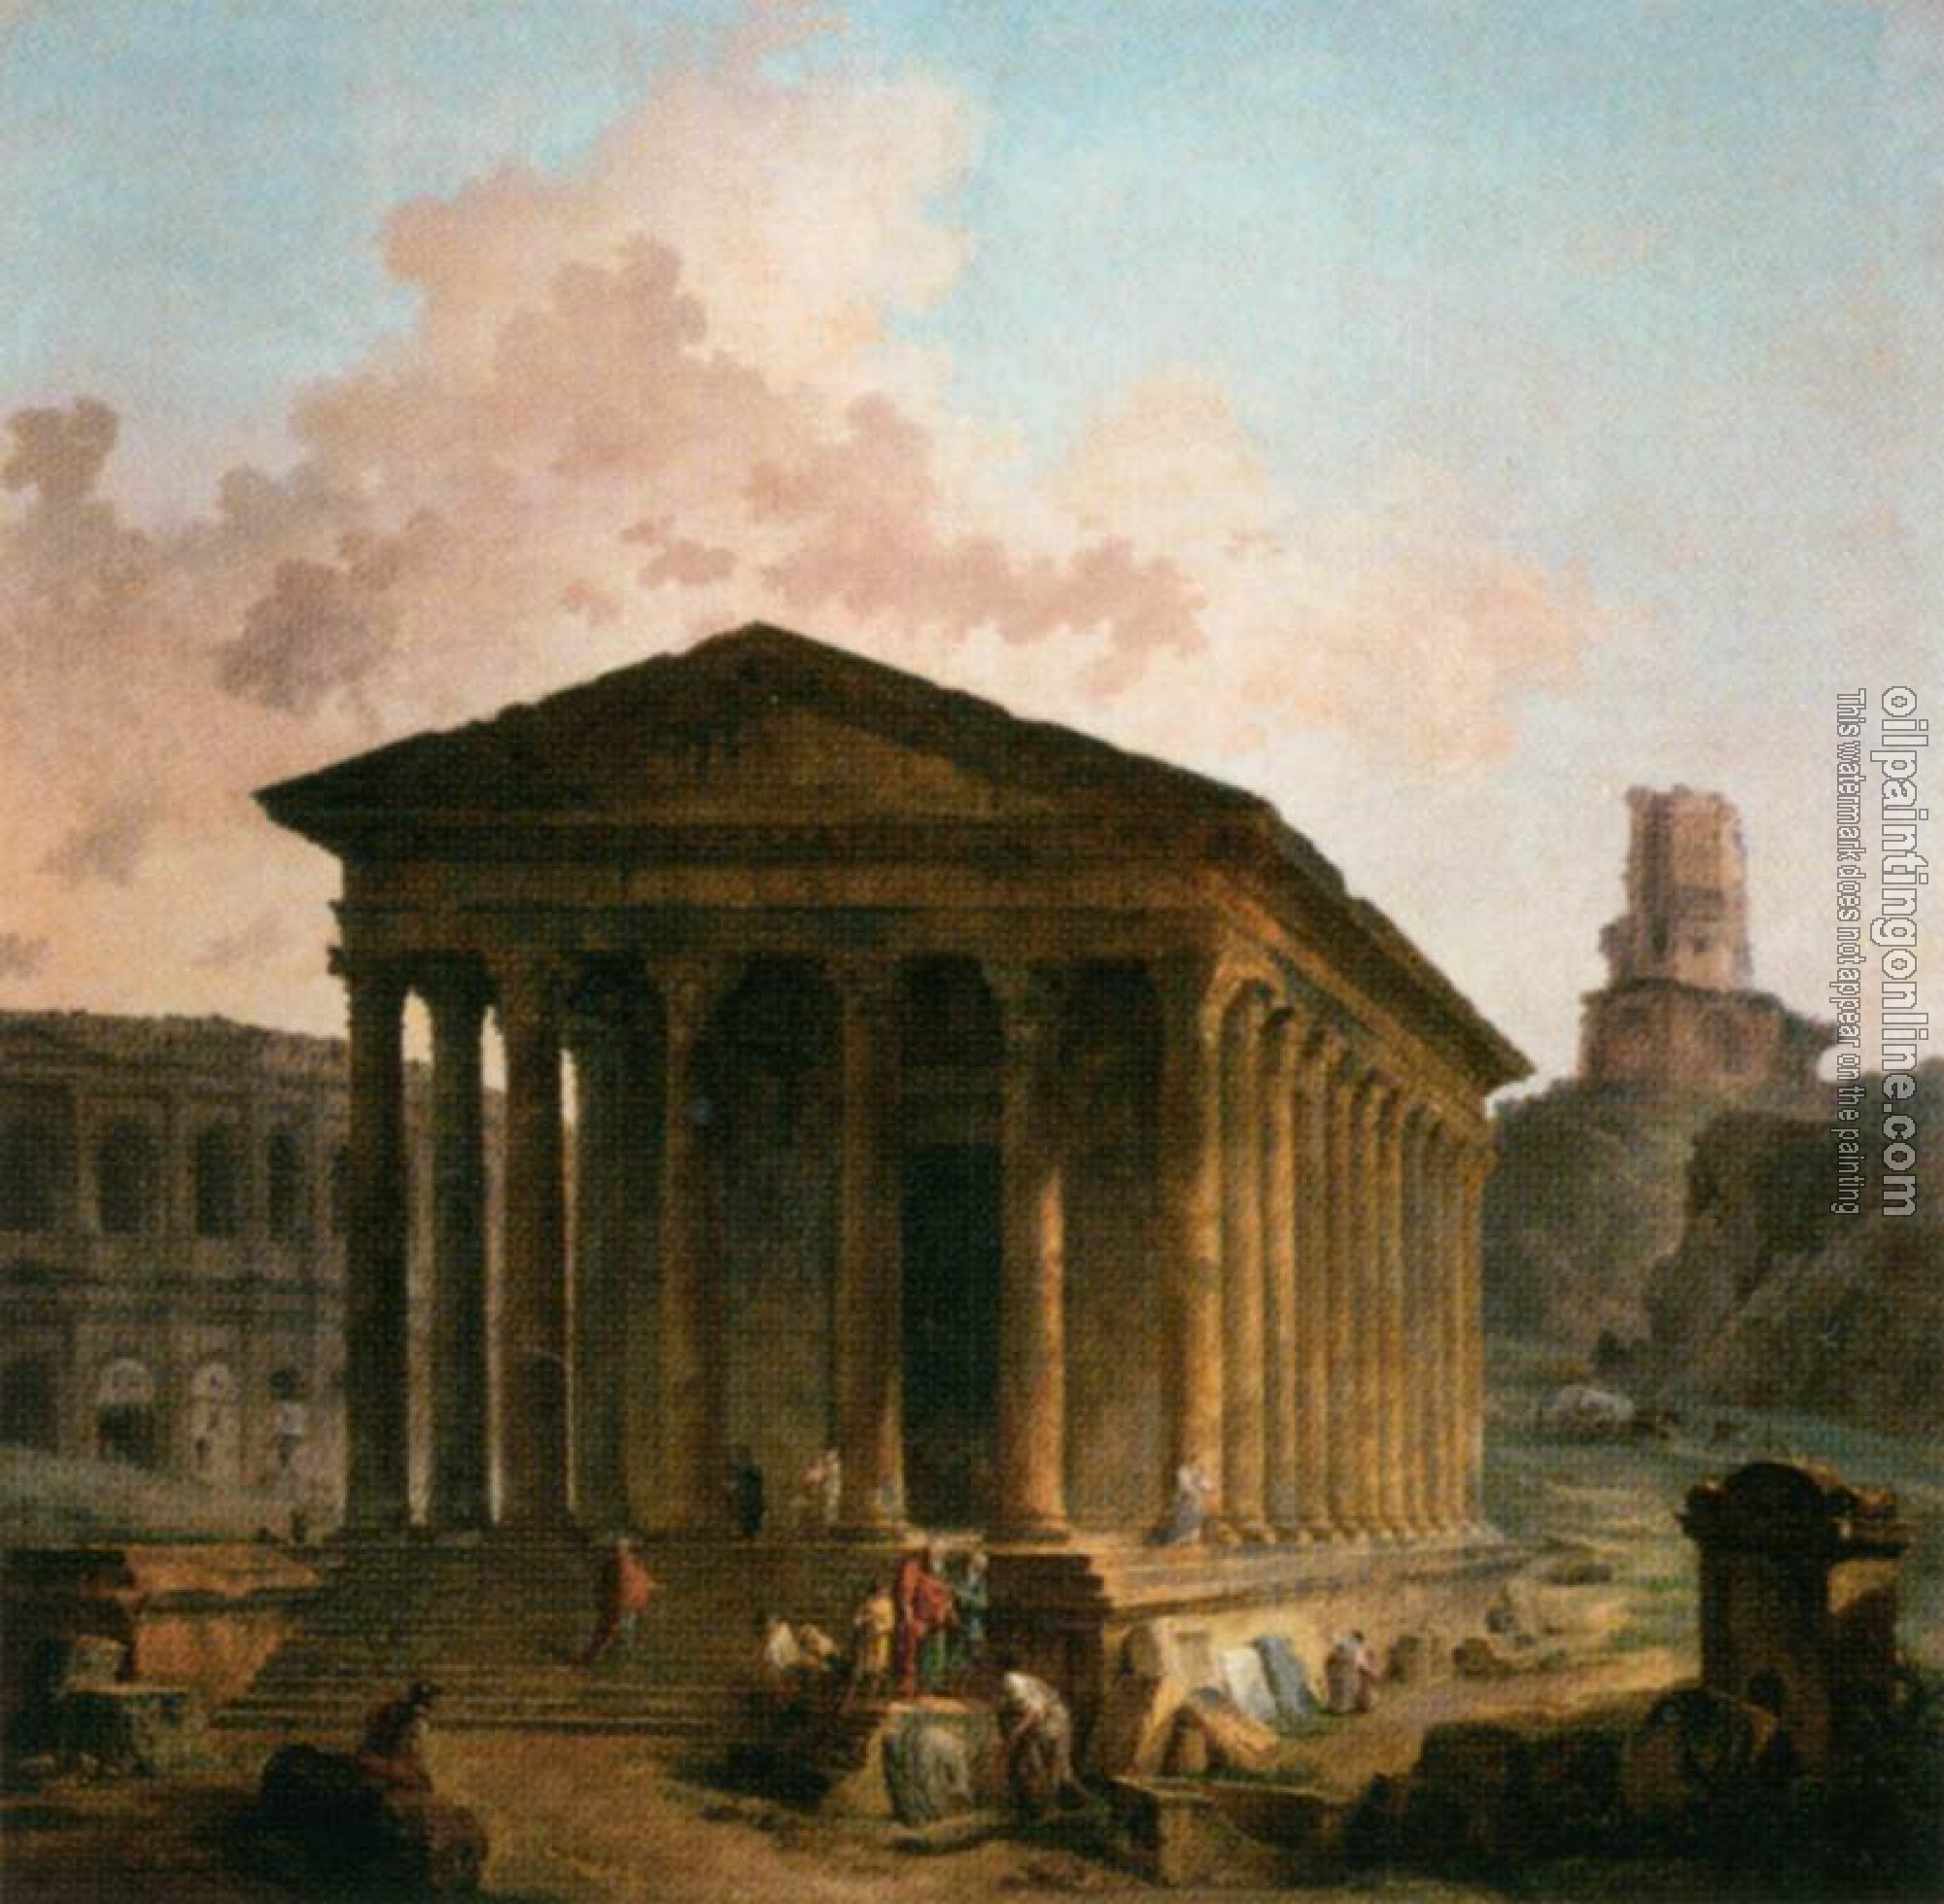 Robert, Hubert - The Maison Caree, the Arenas and the Magne Tower in Nimes